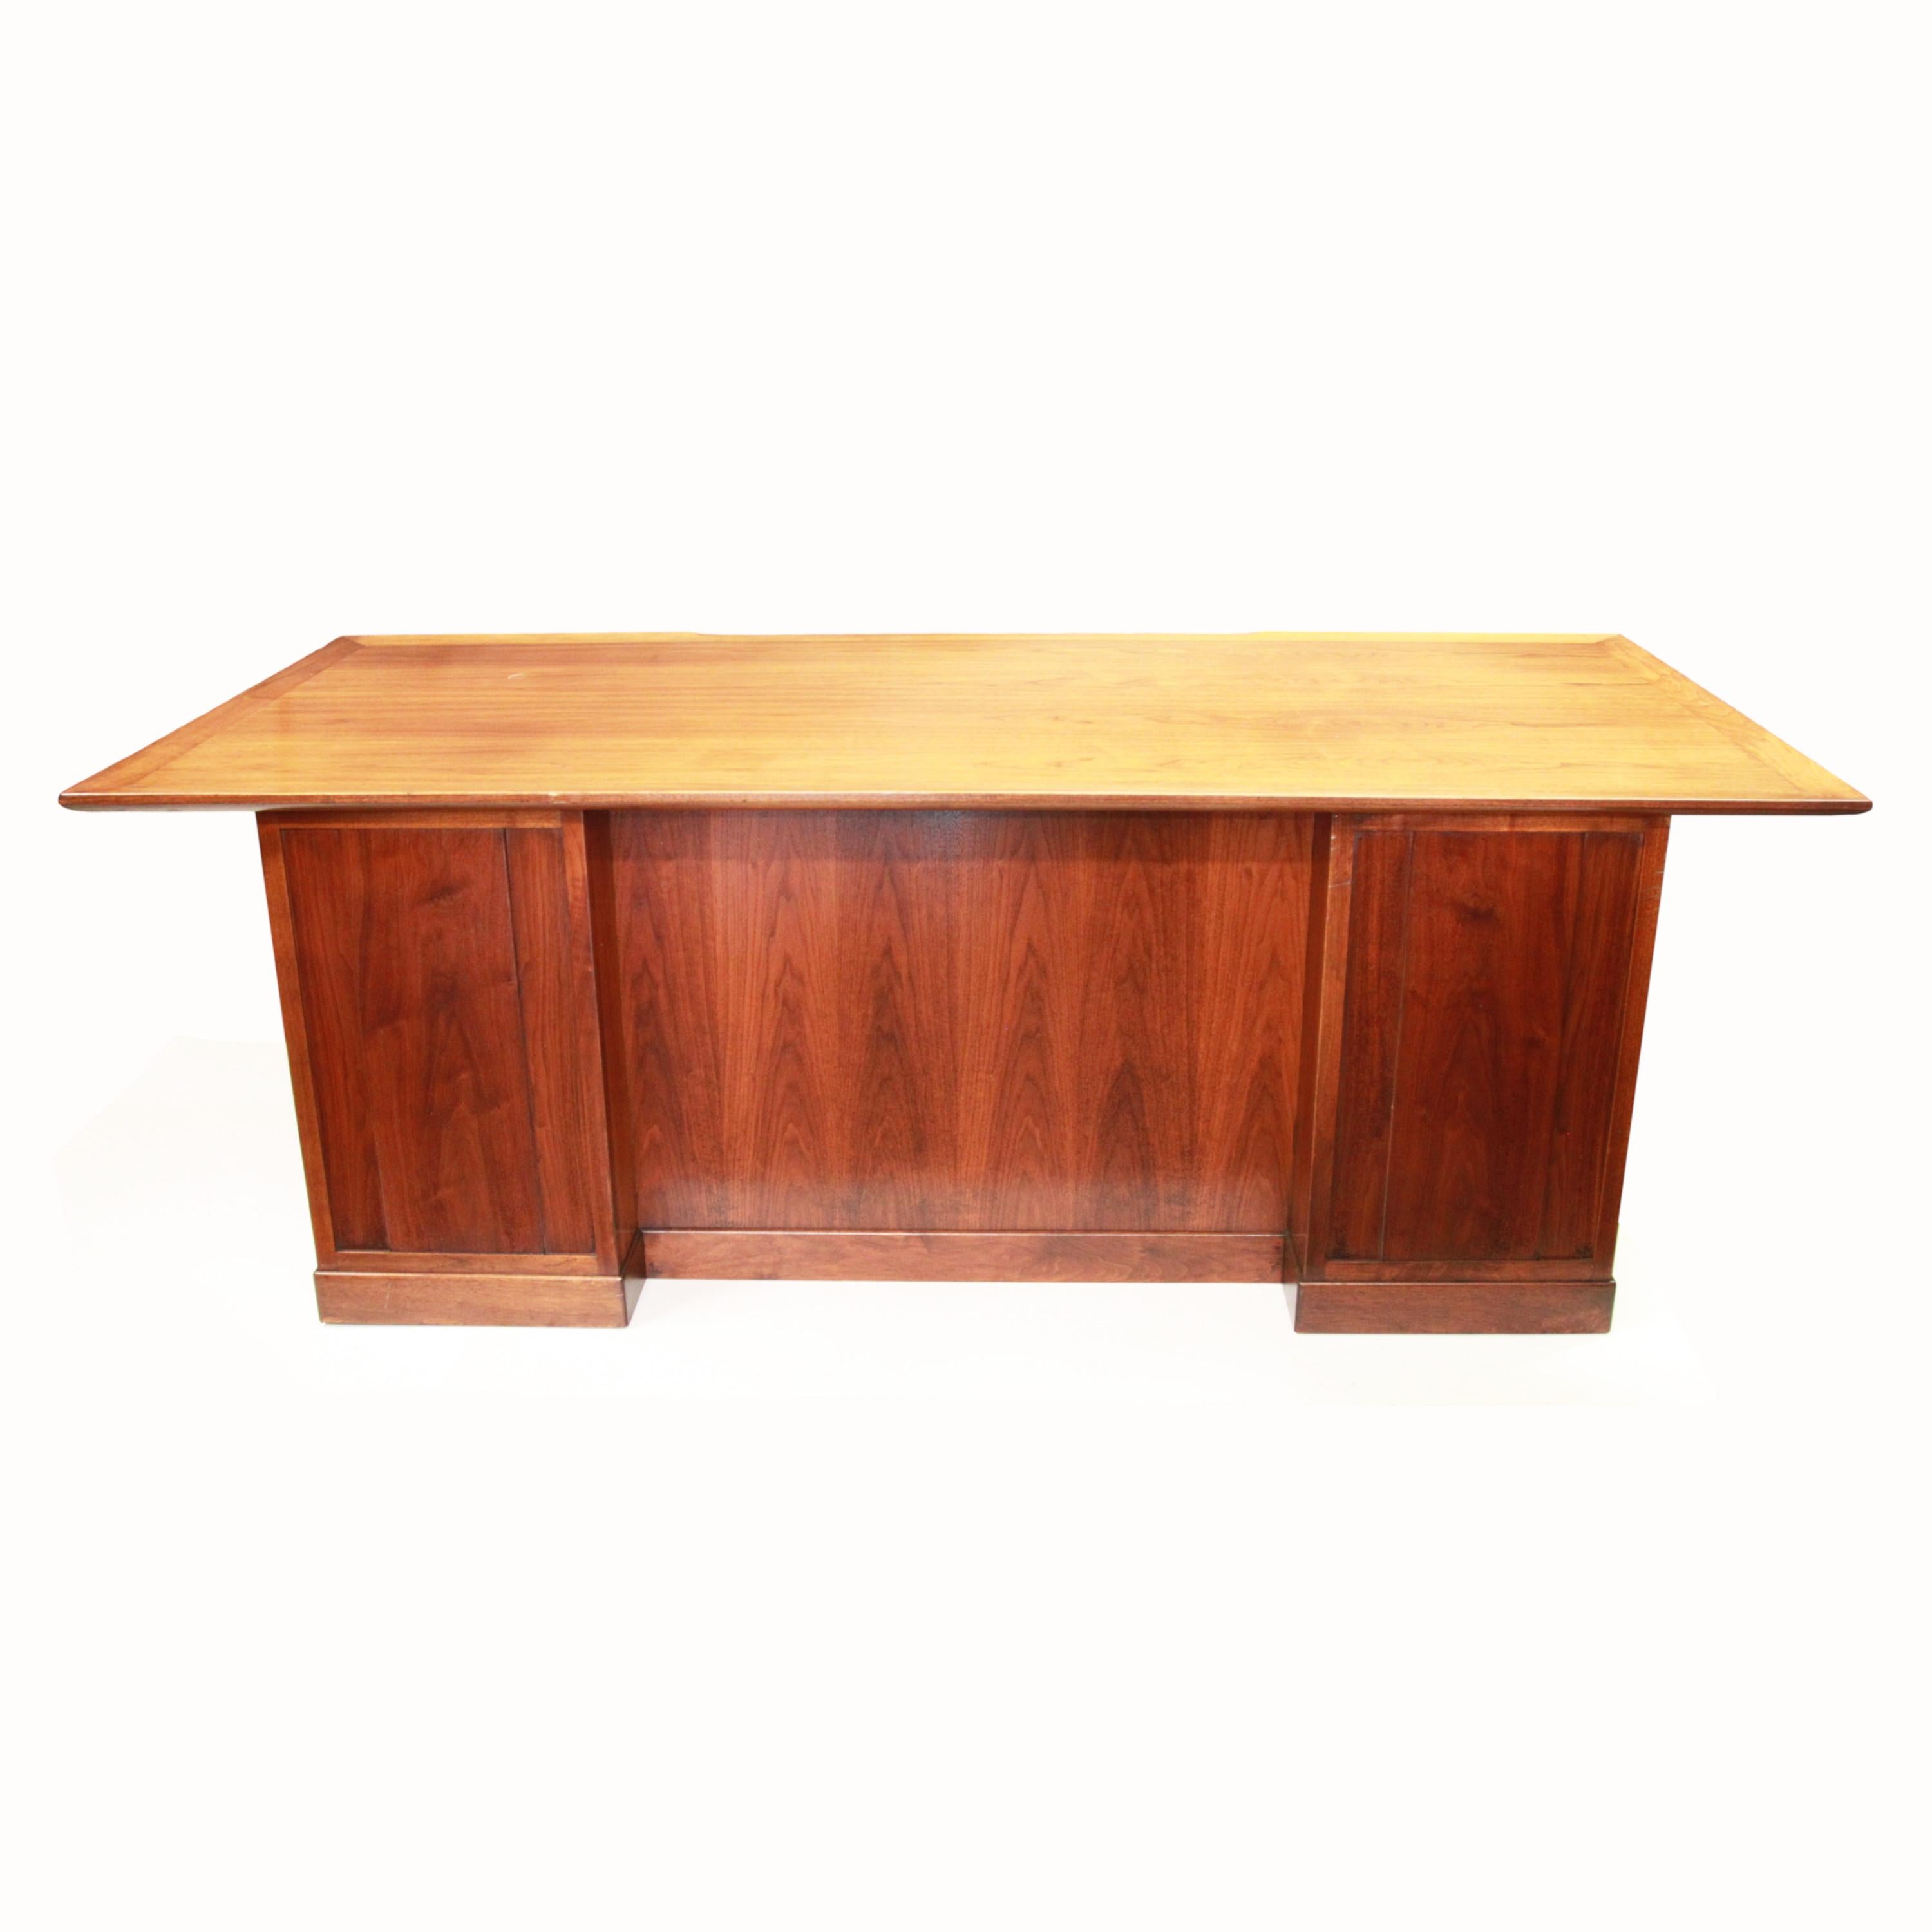 1950s Mid-Century Modern Walnut Executive Desk by Edward Wormley for Dunbar In Good Condition For Sale In Lafayette, IN